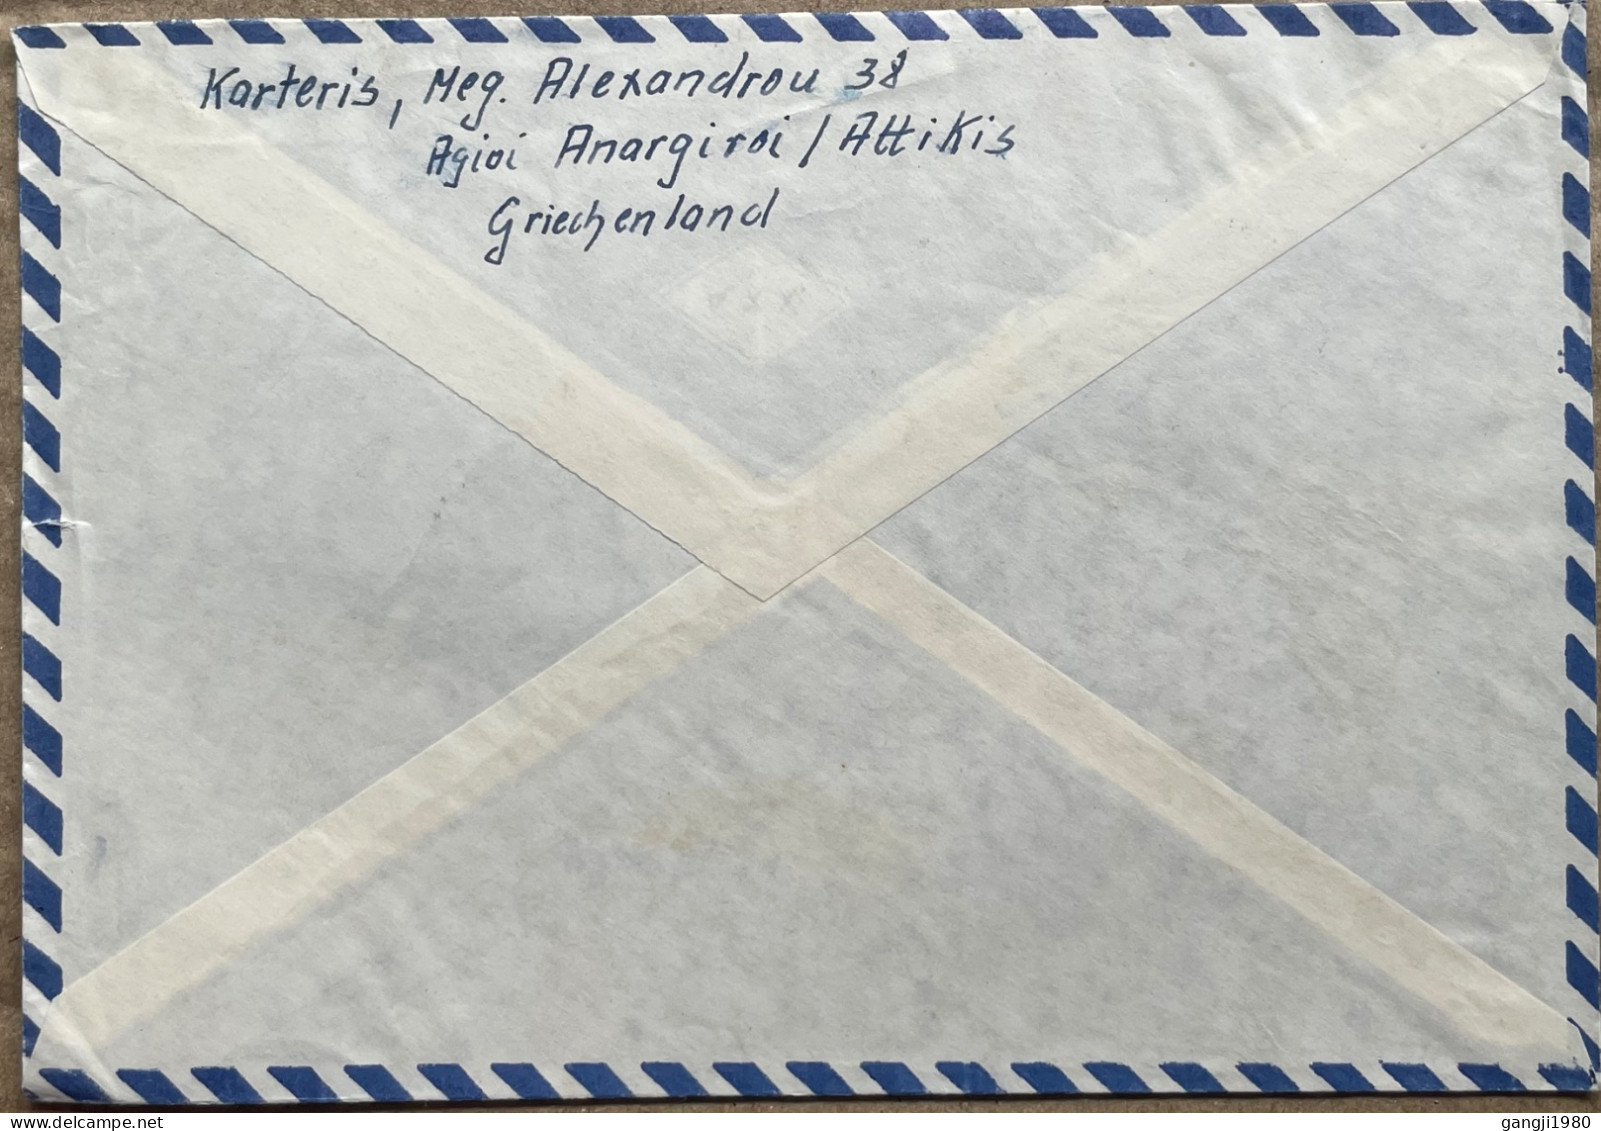 GREECE 1968, COVER USED TO GERMANY, BOXED RETURN FOR PAYMENT OF RE MAILING, 3 DIFF STAMP, RHODE MONUMENT, AIR FORCE AIRC - Brieven En Documenten